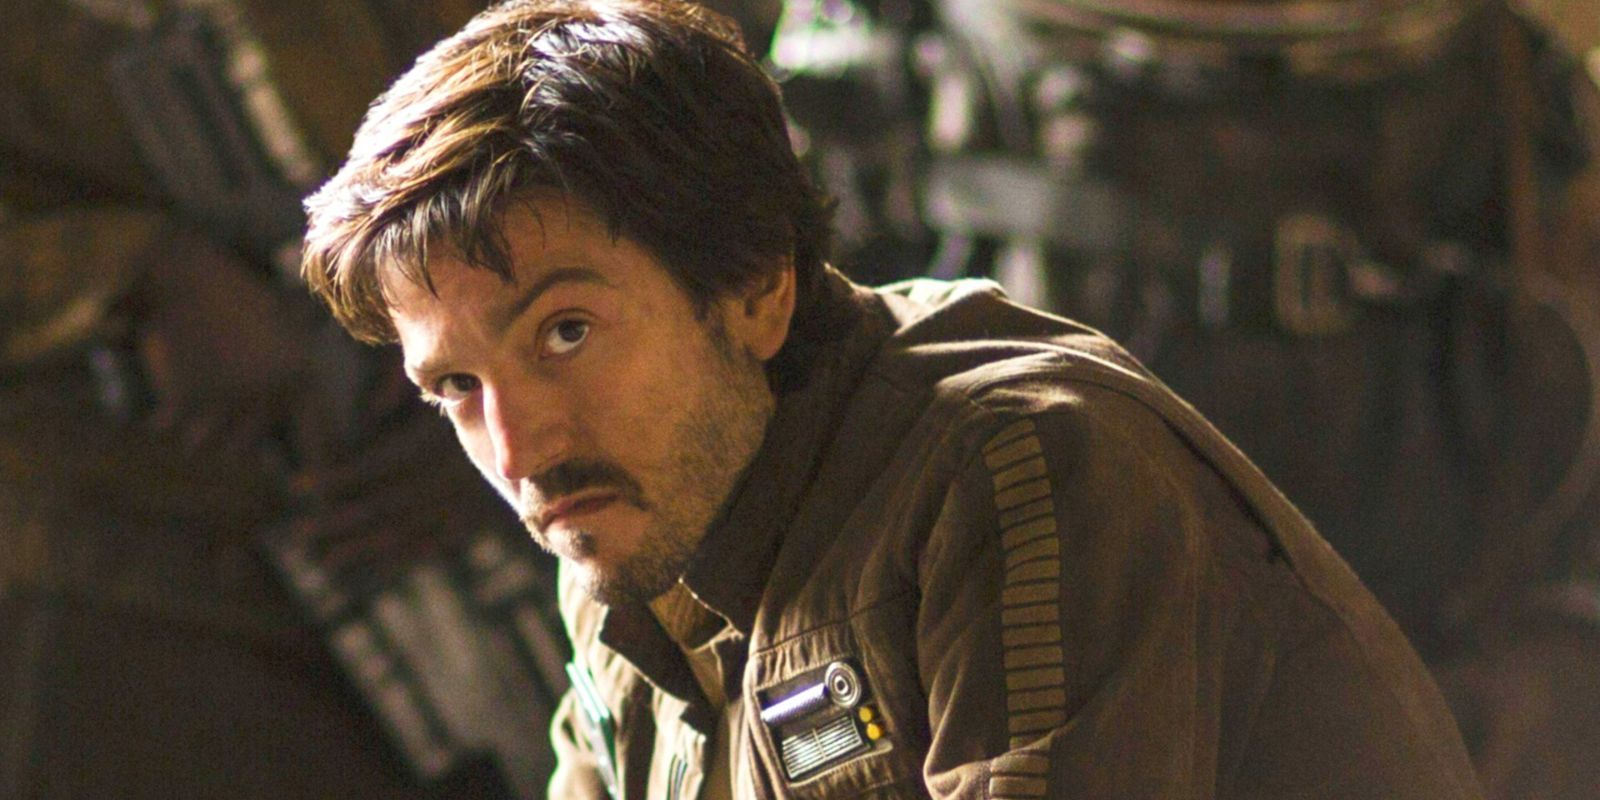 Diego Luna confirms Rogue One prequel series will film this year